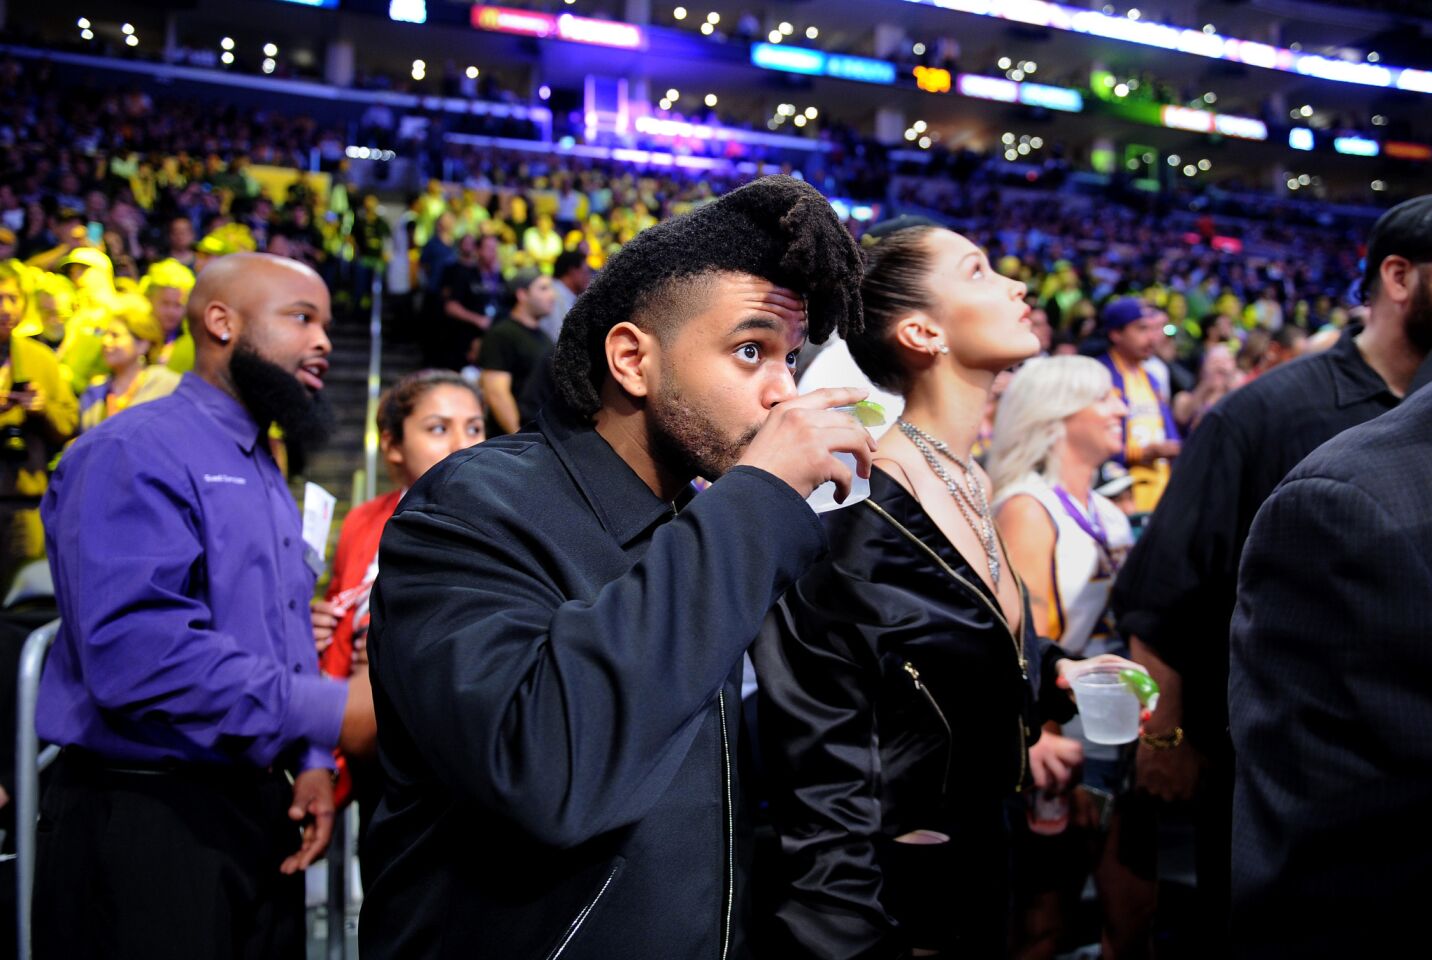 The Weeknd and girlfriend Bella Hadid arrive for Kobe Bryant's final game at Staples Center.